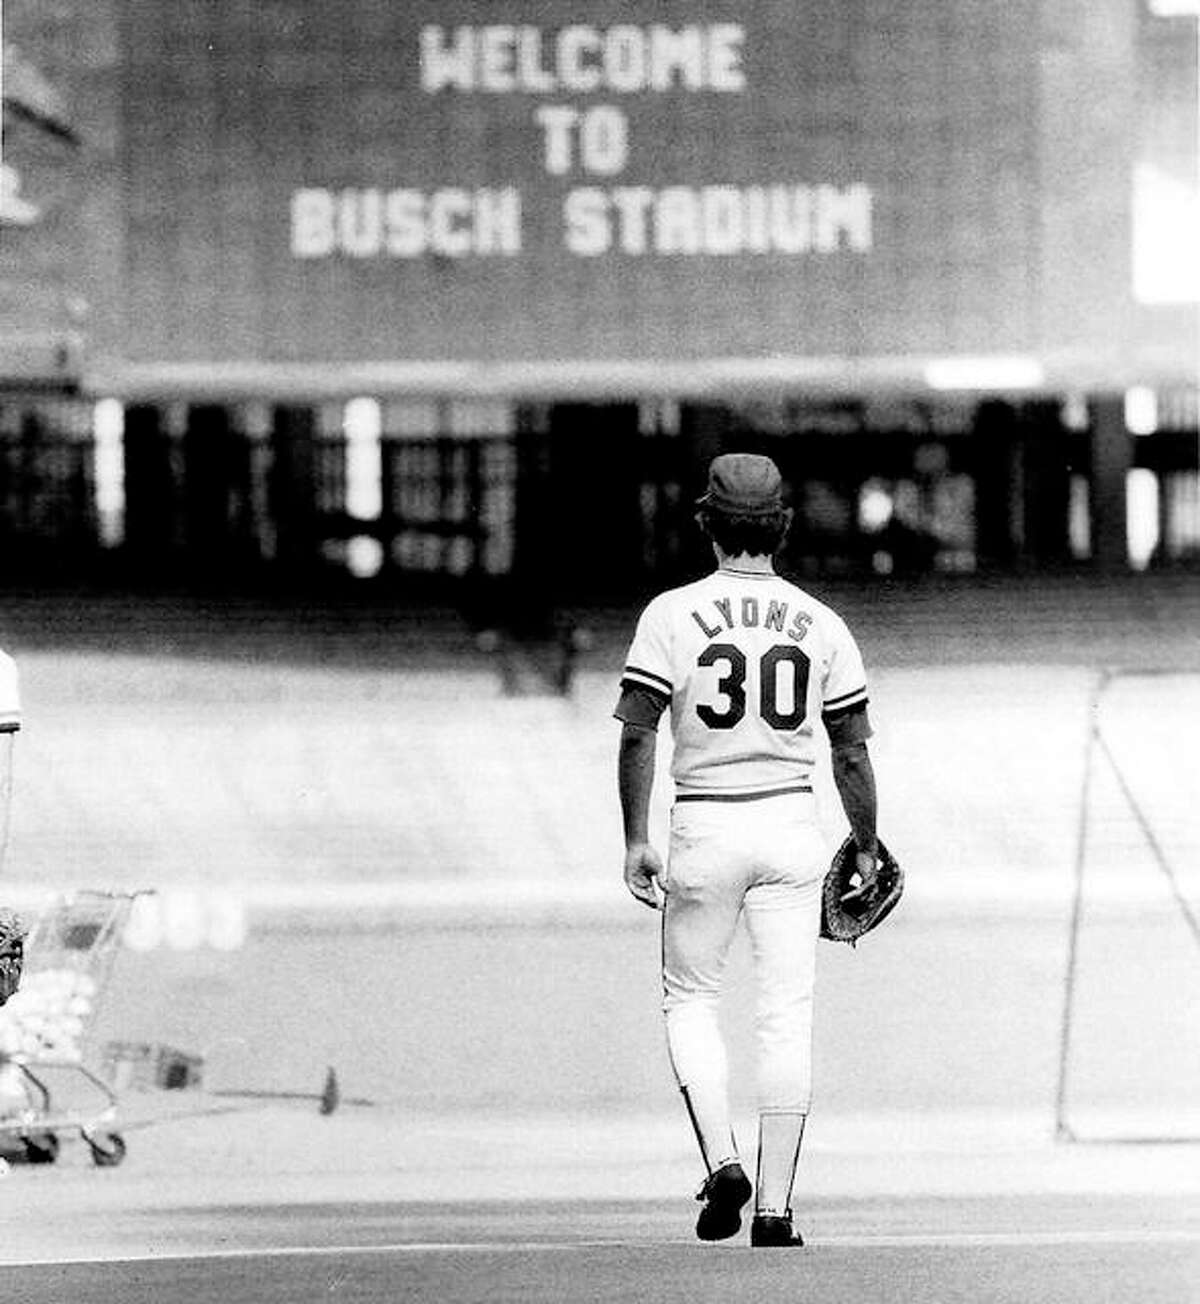 Alton’s Bill Lyons walks onto the playing field at Busch Stadium for the first time in 1983 in a photo by former Telegraph photographer Russ Smith. Lyons’ first day with the Cardinals was the subject of a feature article at the time.